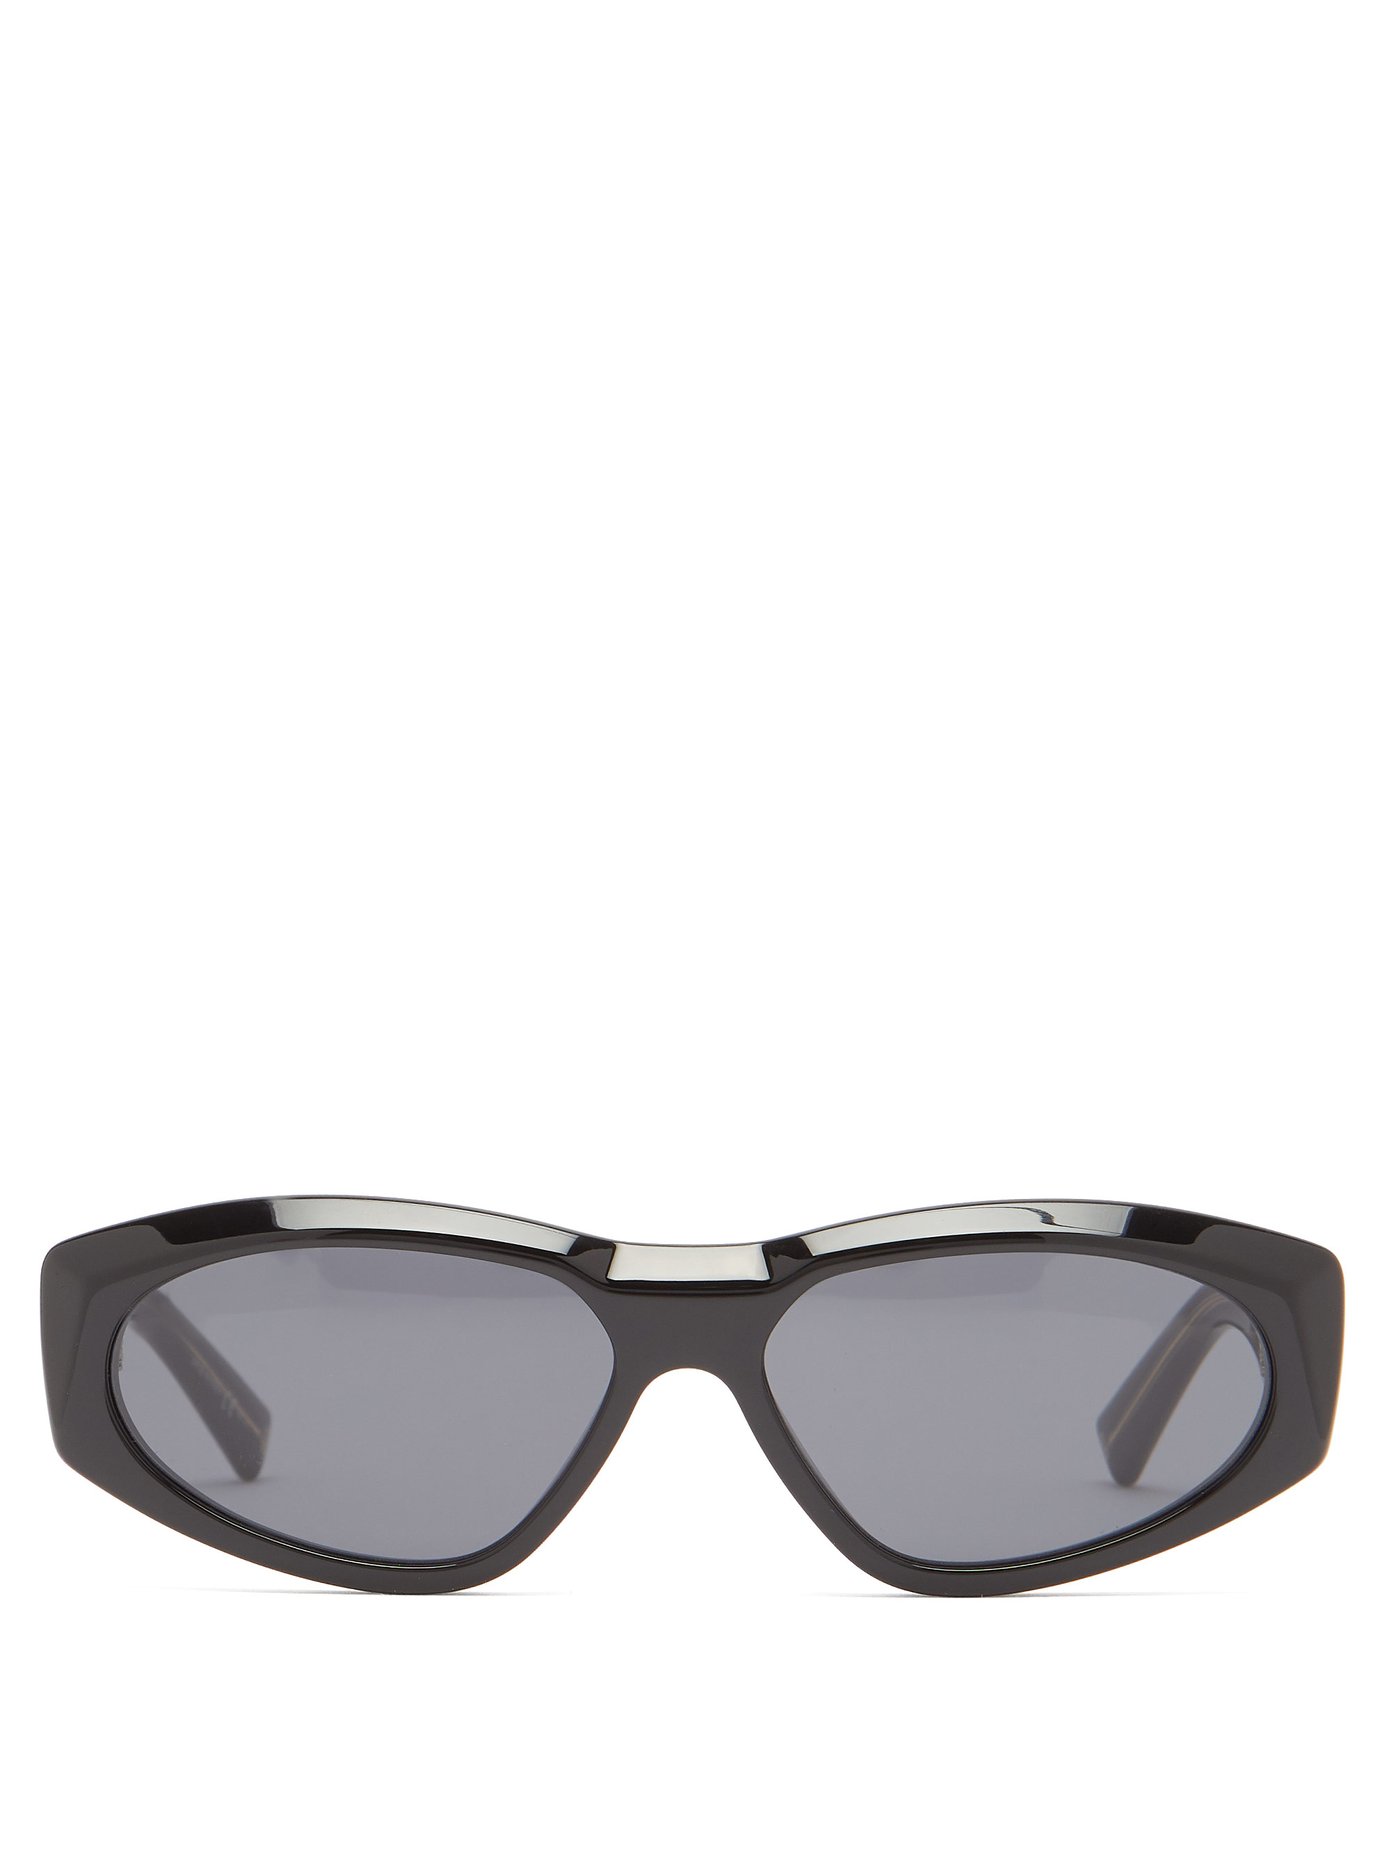 givenchy oval sunglasses